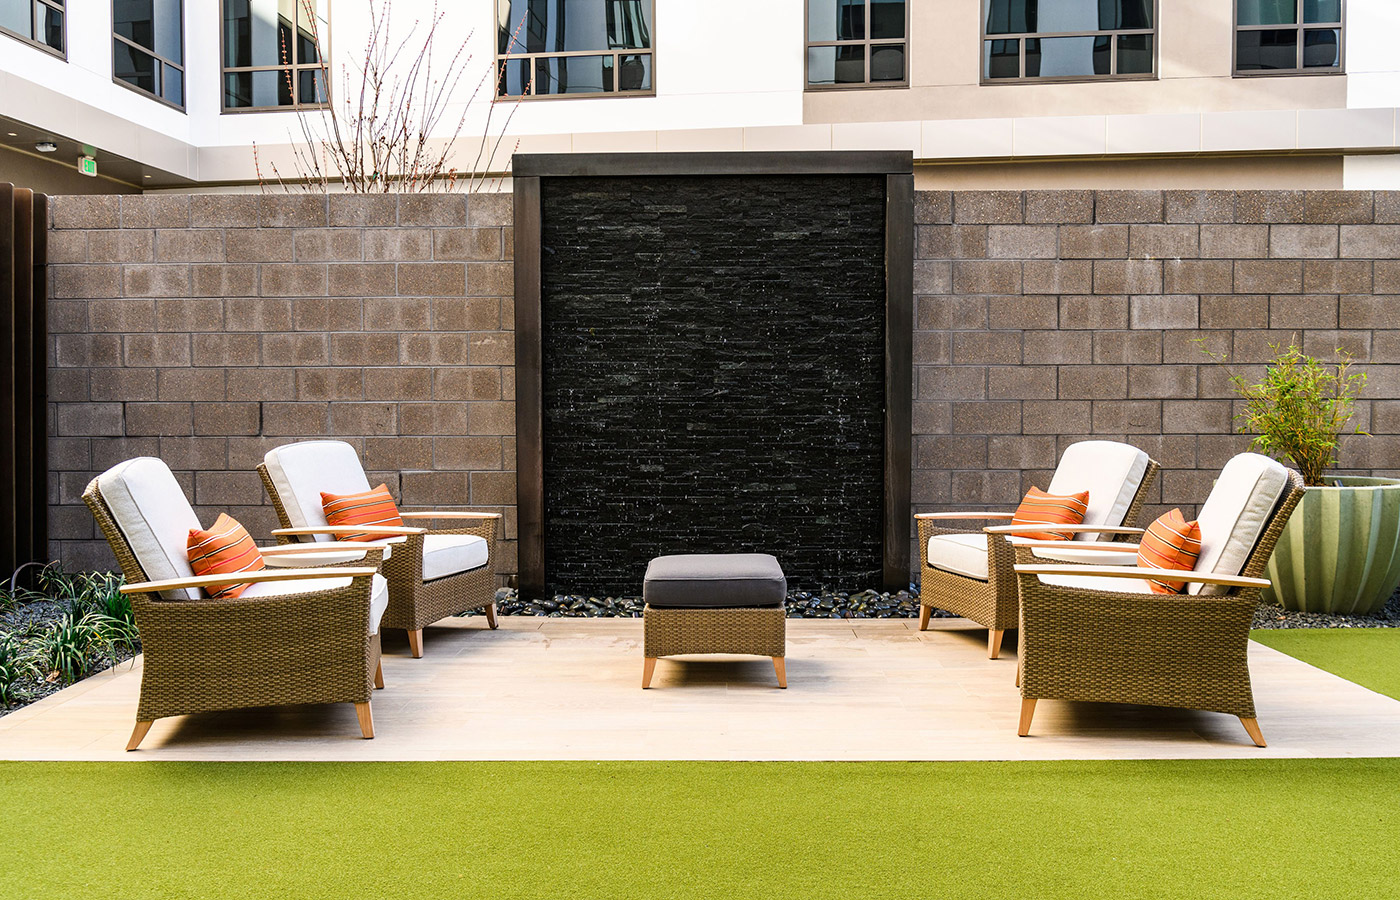 outdoor seating within courtyard area